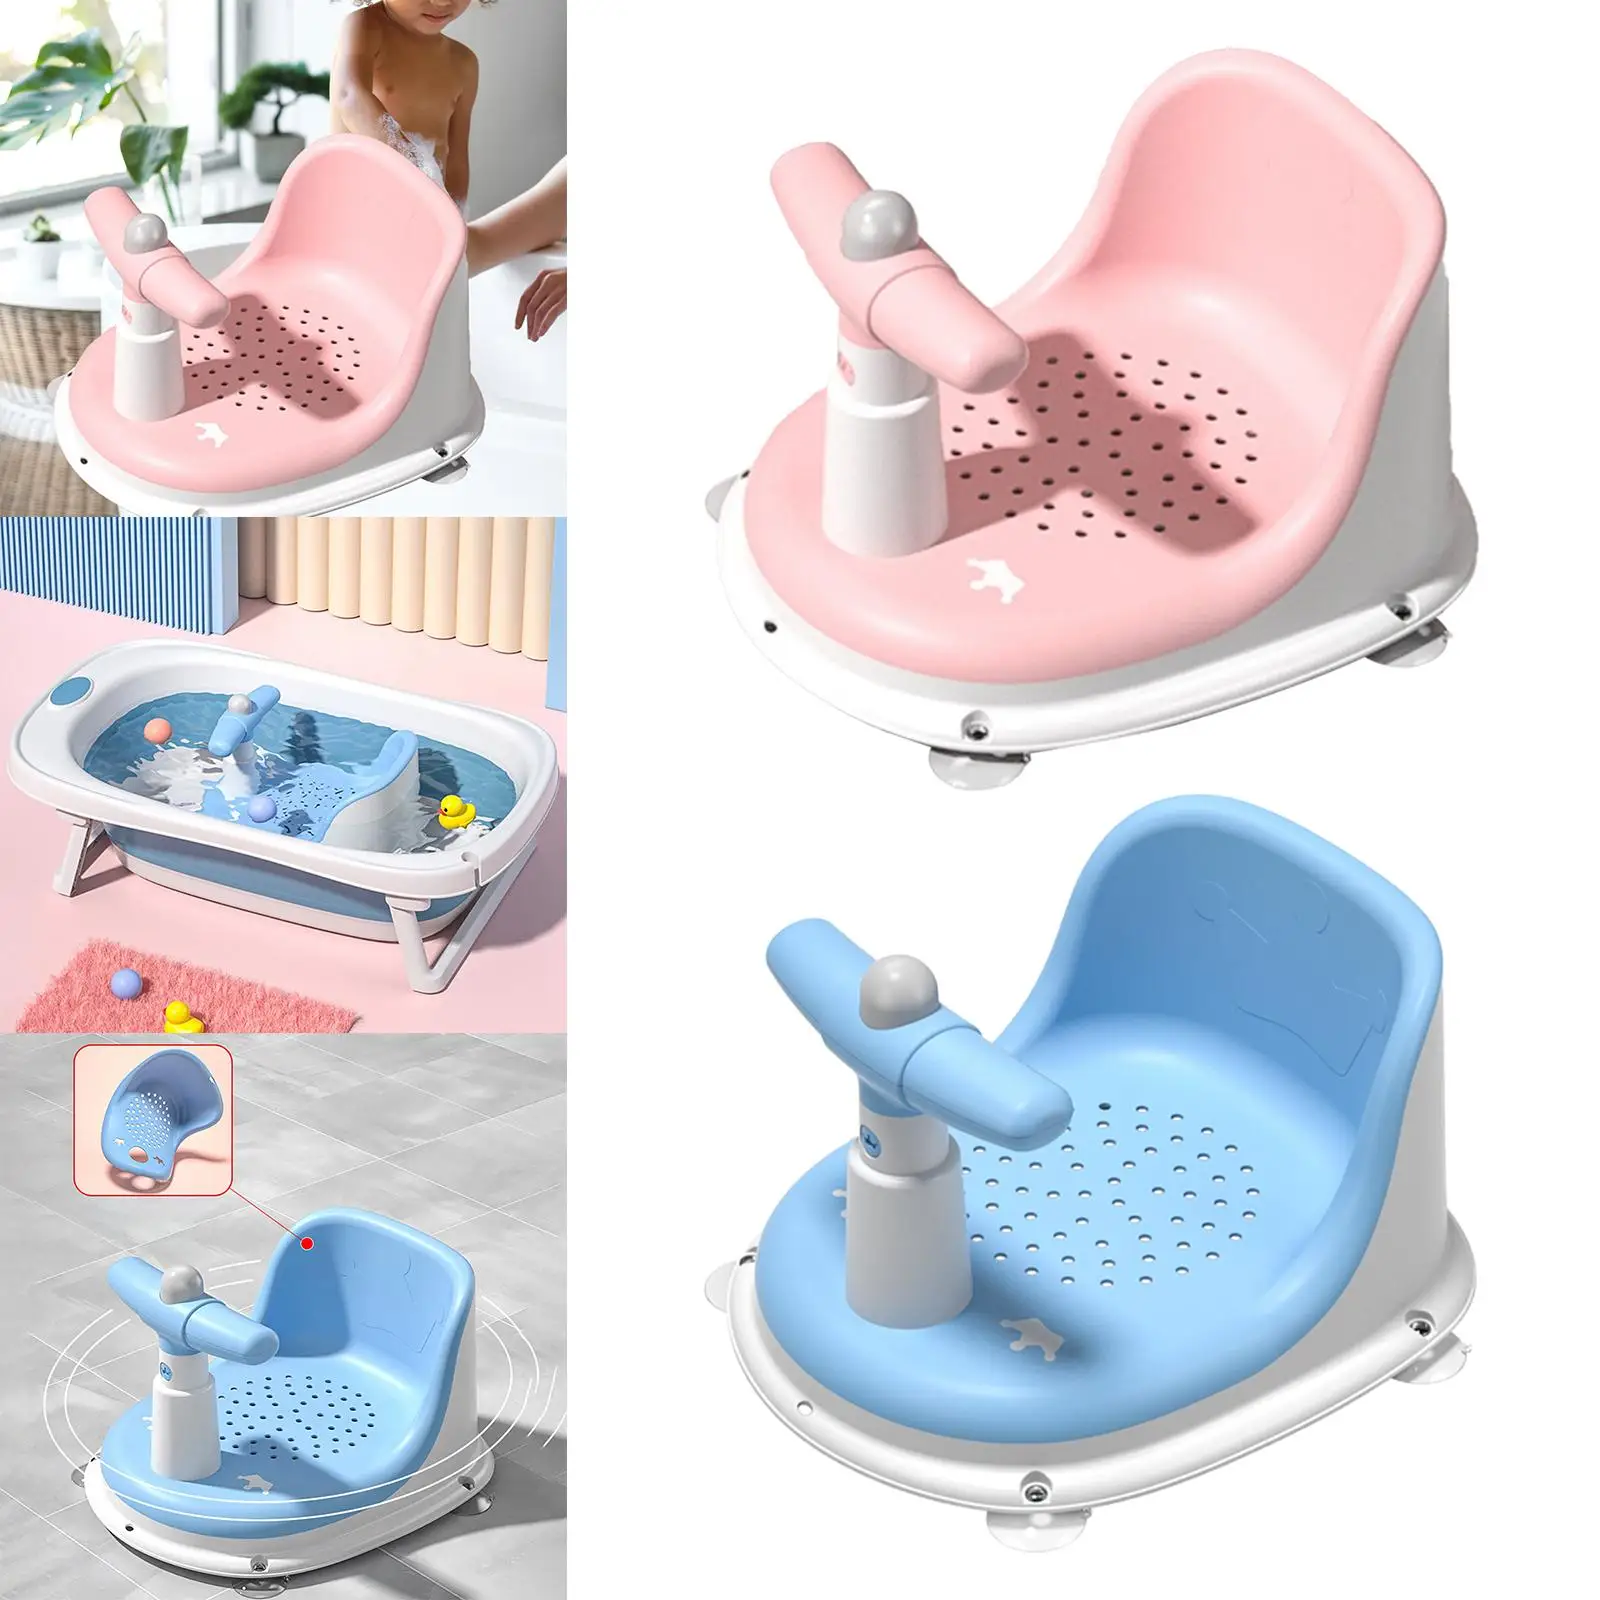 Baby Bath Seat with Secure Suction Cups Soft Mat Comfortable Fashionable for Travel